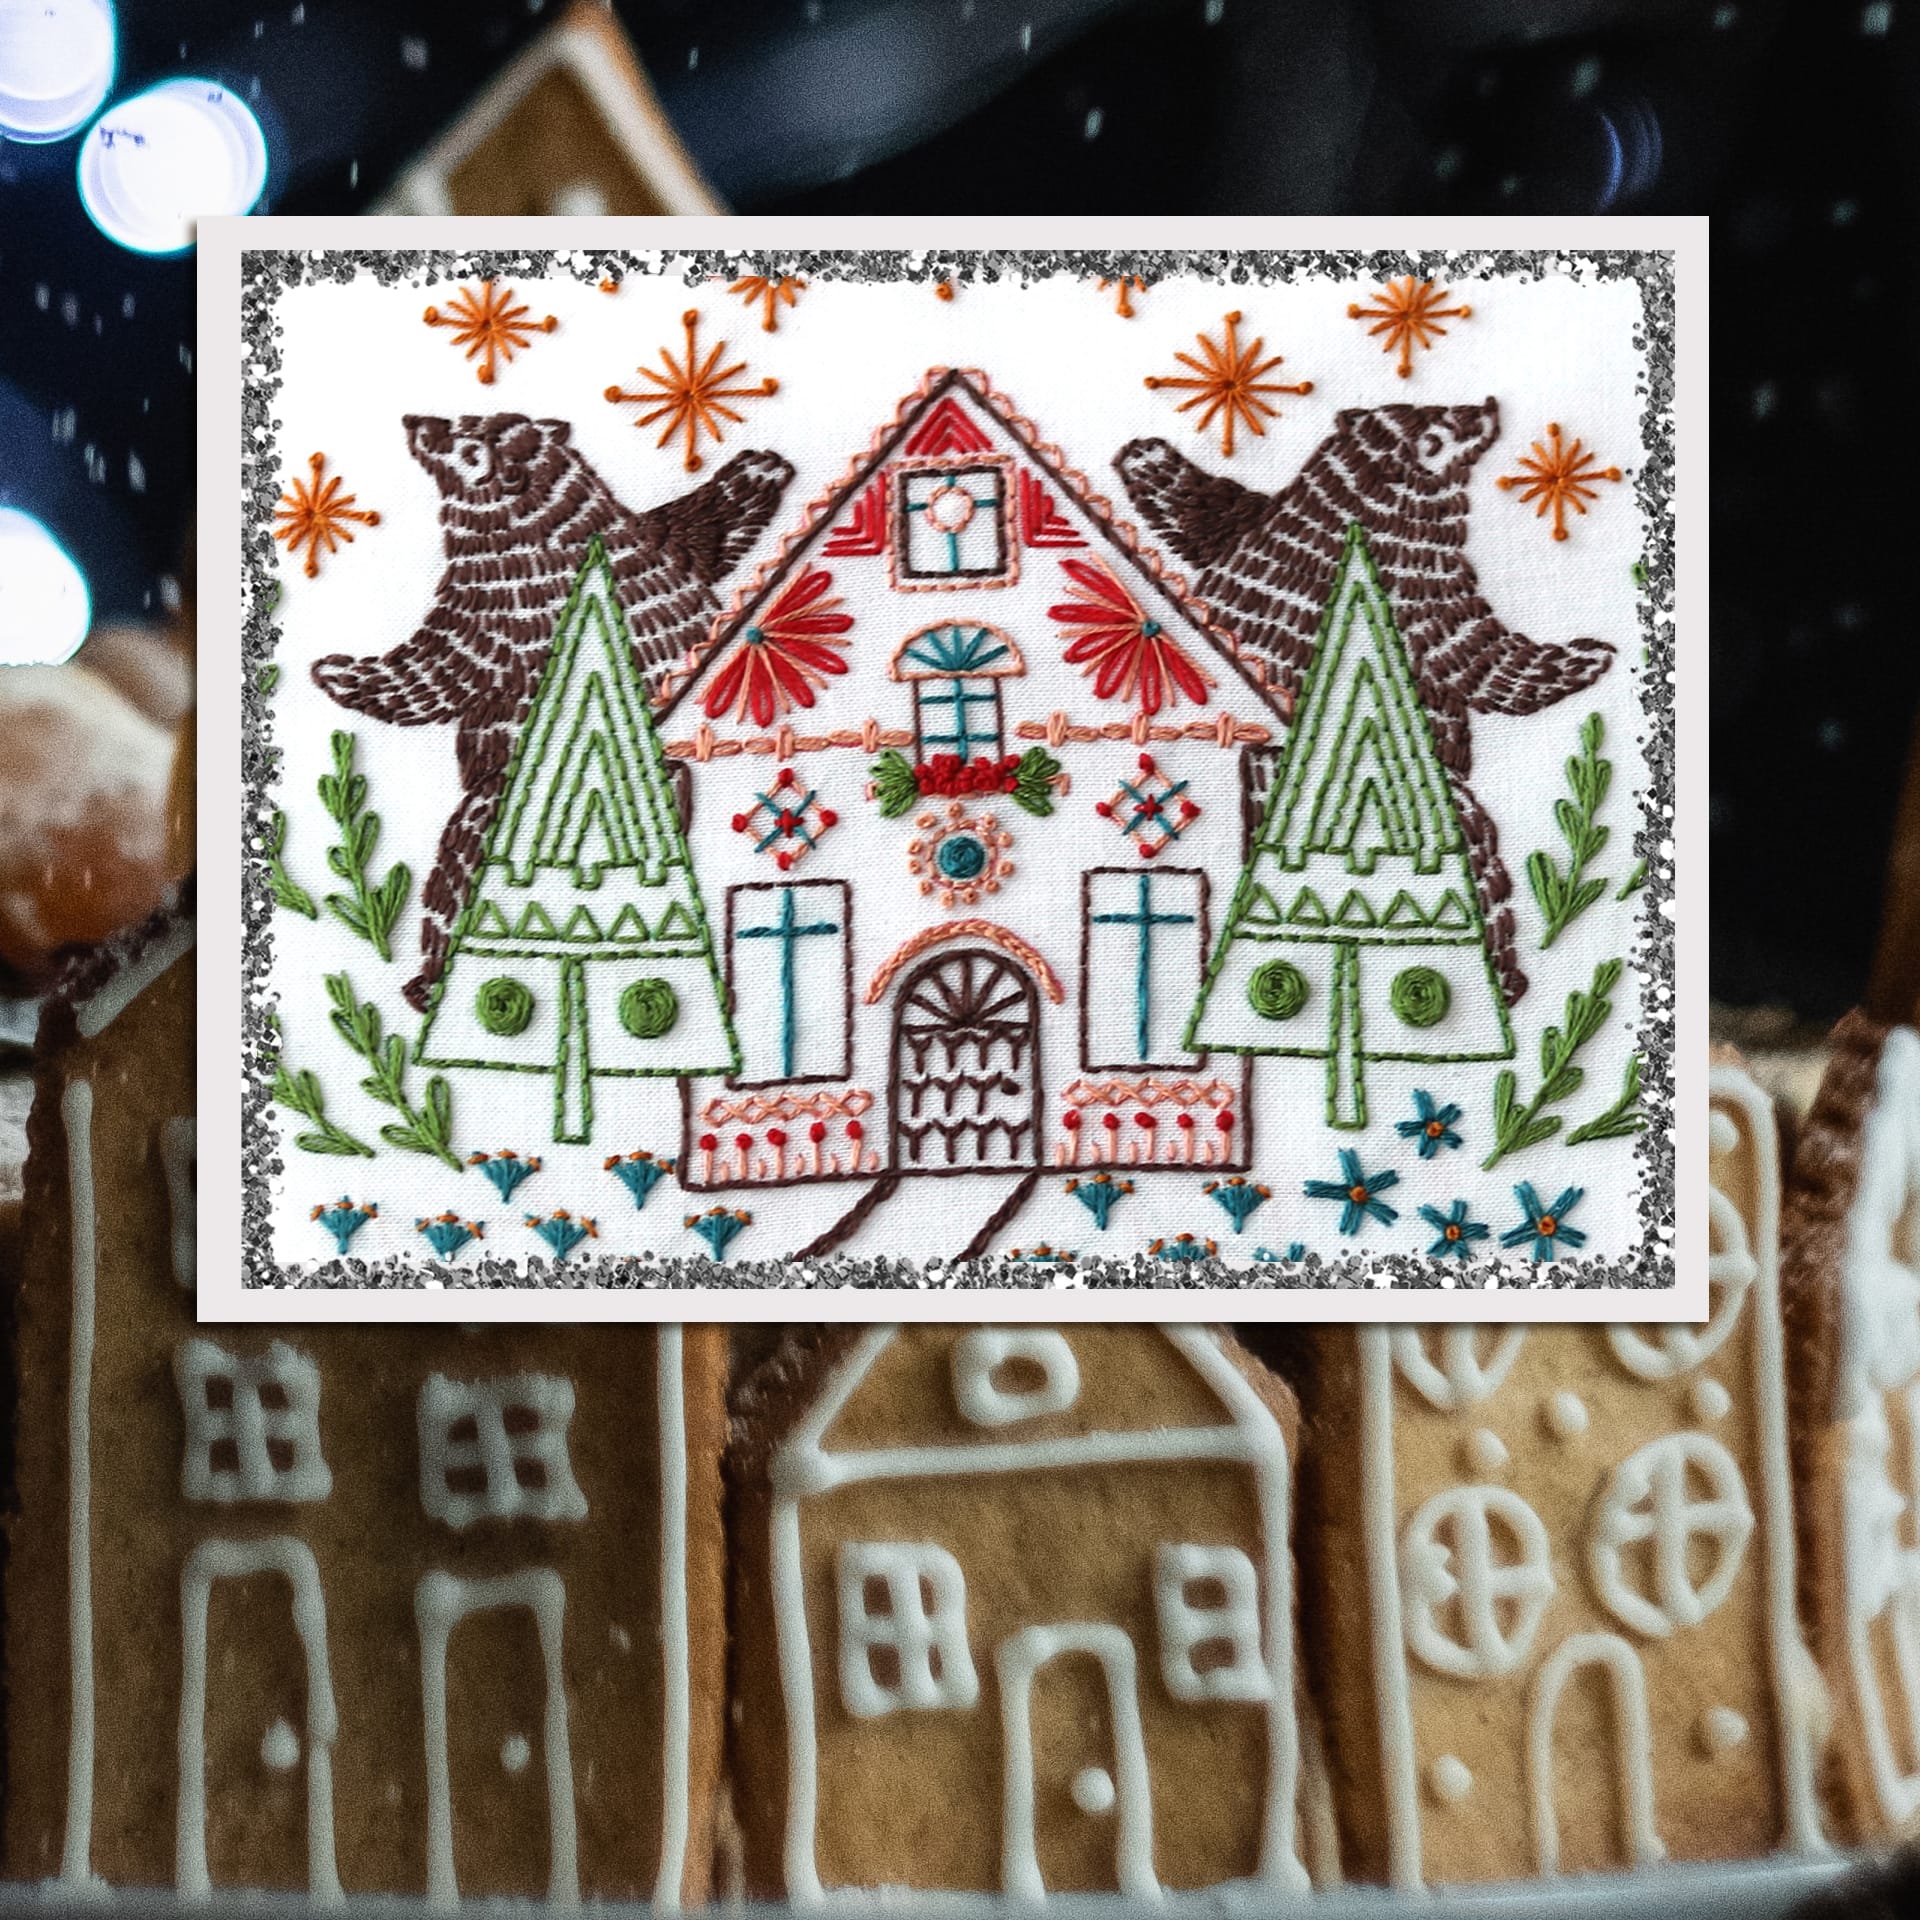 embroidered bears dancing in the starlight behind gingerbread inspired cottage